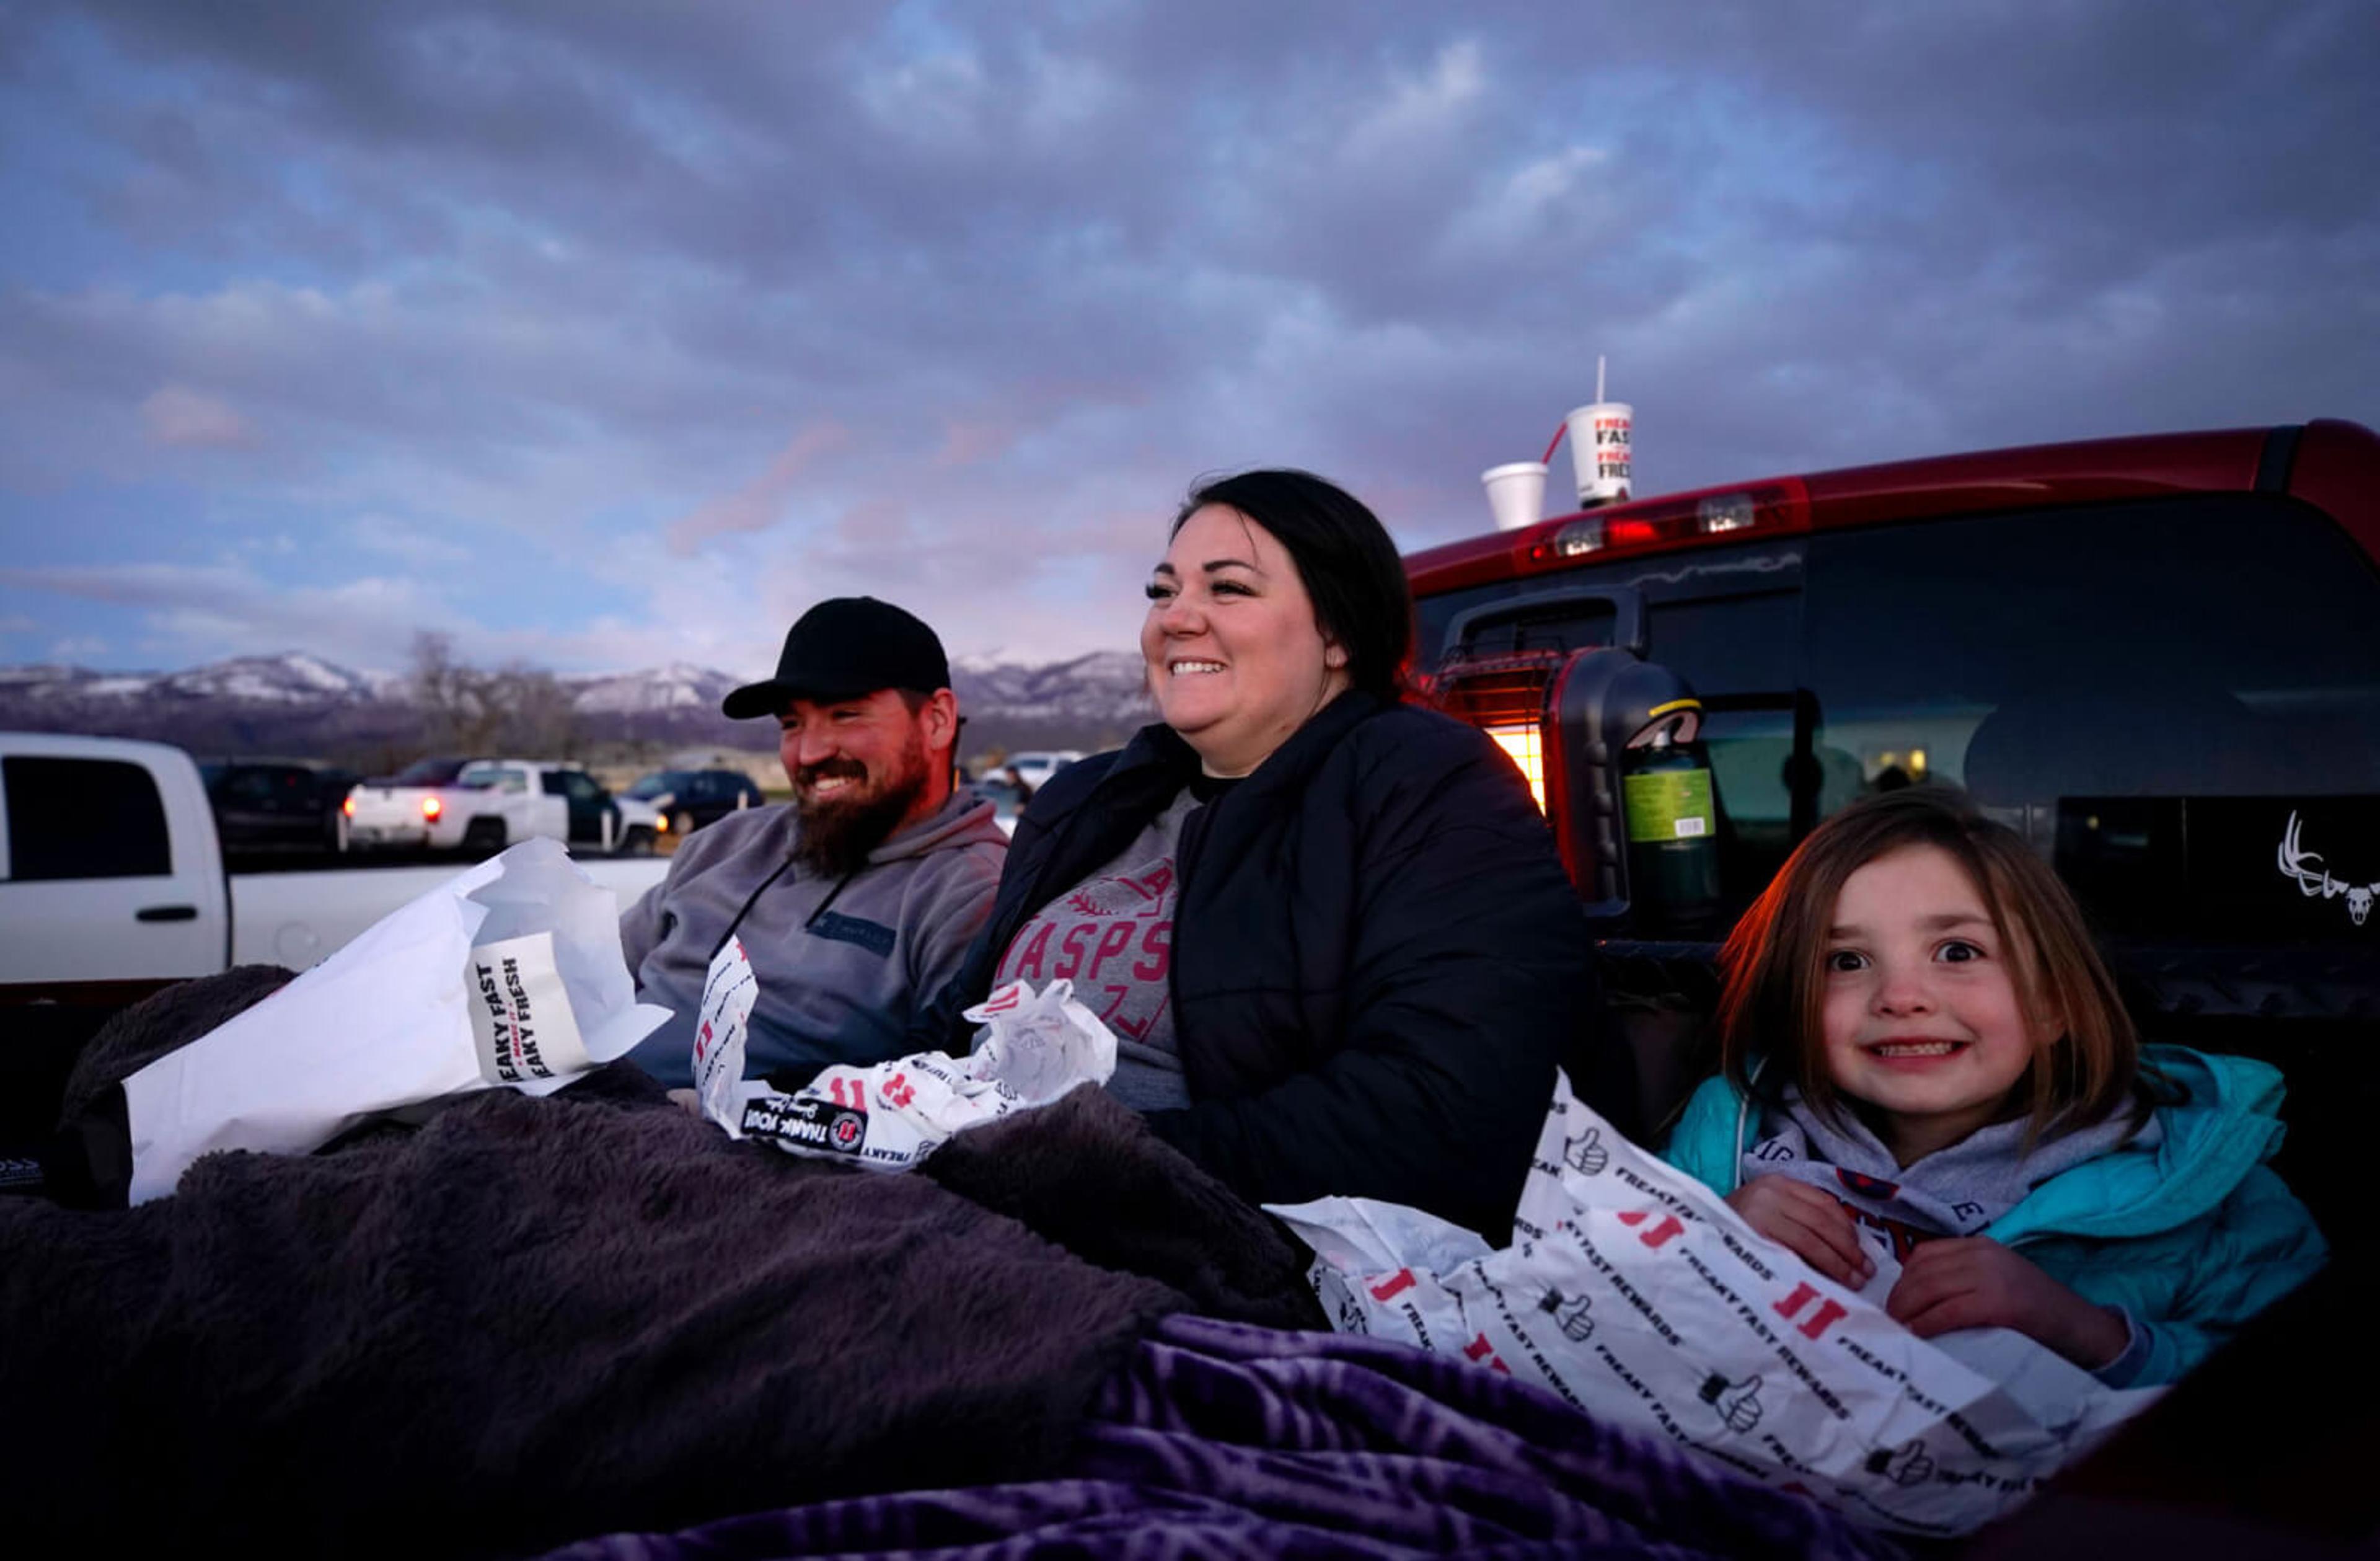 Three family members eat food in the back of their truck while attending an outdoor event.